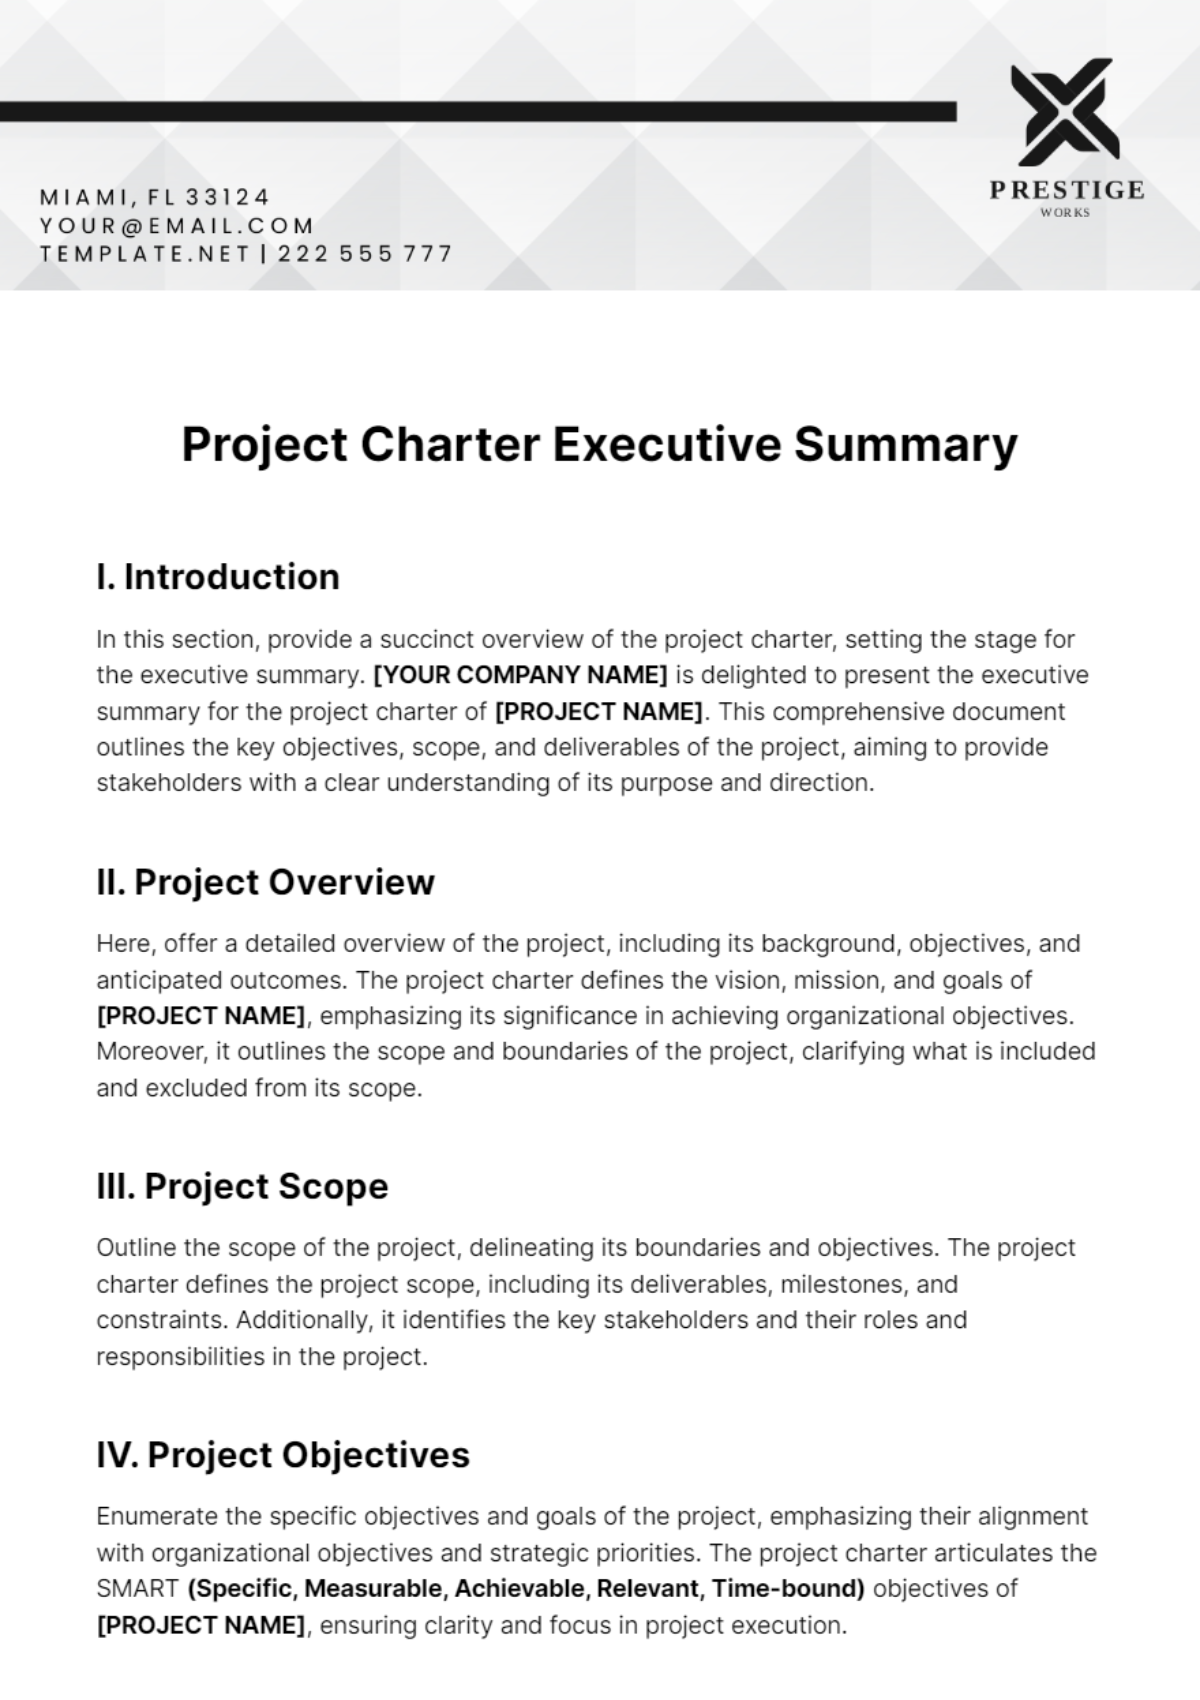 Project Charter Executive Summary Template